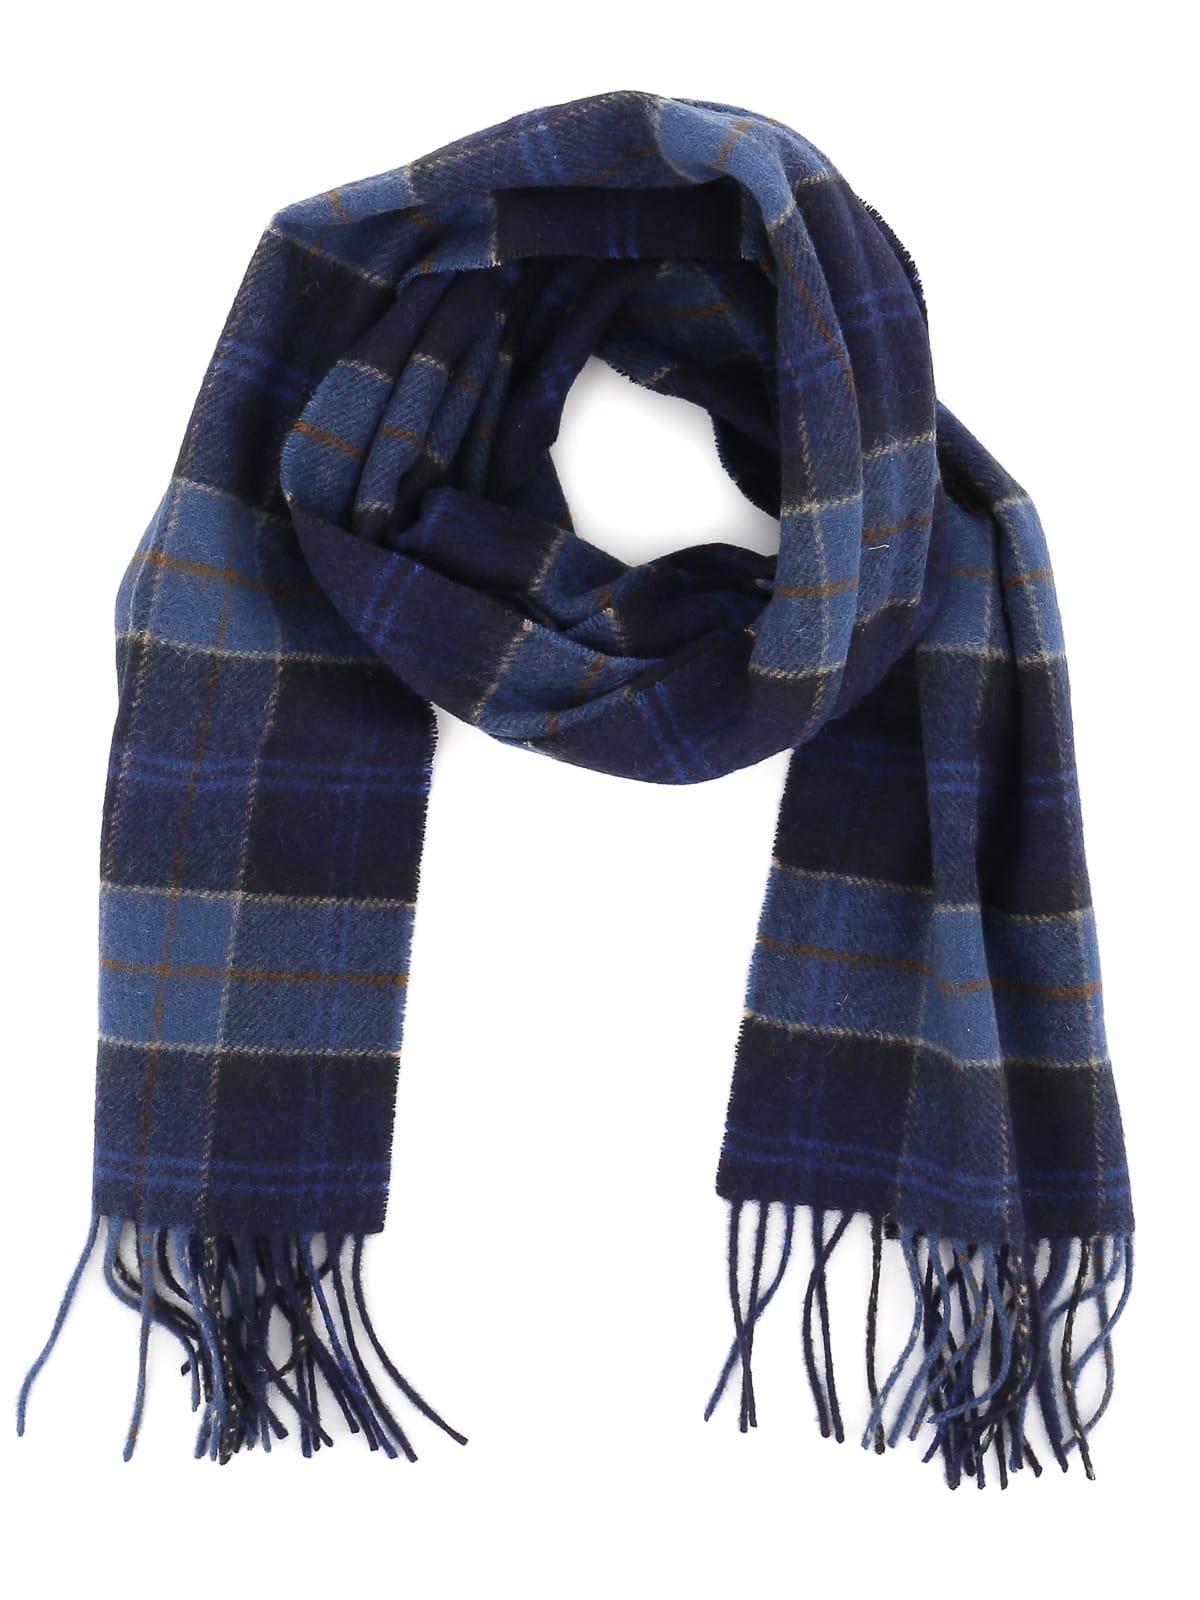 Barbour Tartan Lambswool Scarf in Blue for Men - Save 61% | Lyst